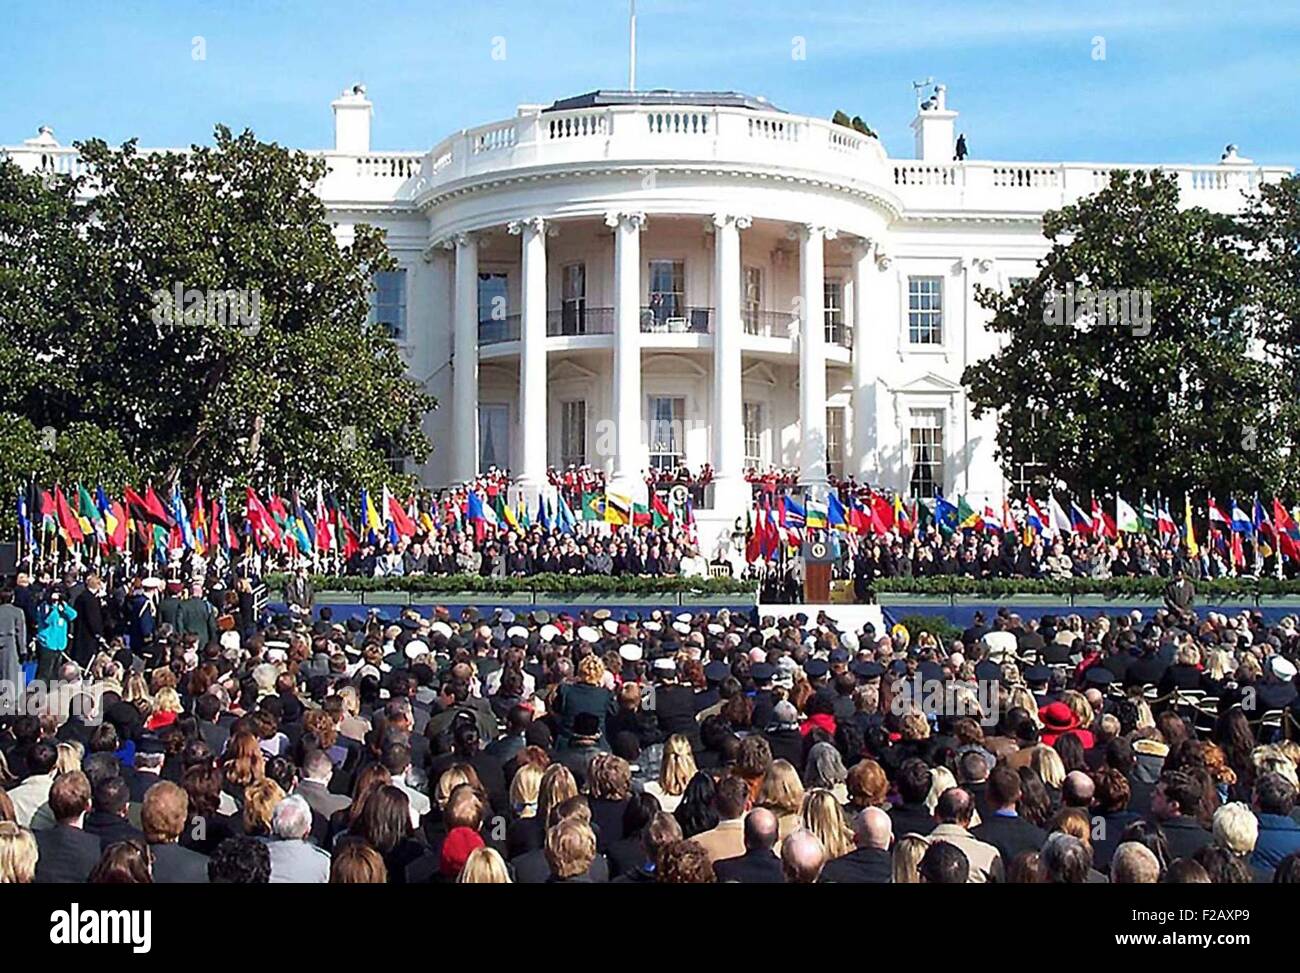 1,000 people at a six-month remembrance of the 9-11 terrorist attacks at the White House. March 11, 2002. In attendance are members from 29 coalition nations in the worldwide fight against terrorism. More than 120 ambassadors, members of Congress, the Bush Cabinet, Supreme Court and armed forces also attended. U.S. Navy Photo by Rudi Williams. (BSLOC 2015 2 122) Stock Photo